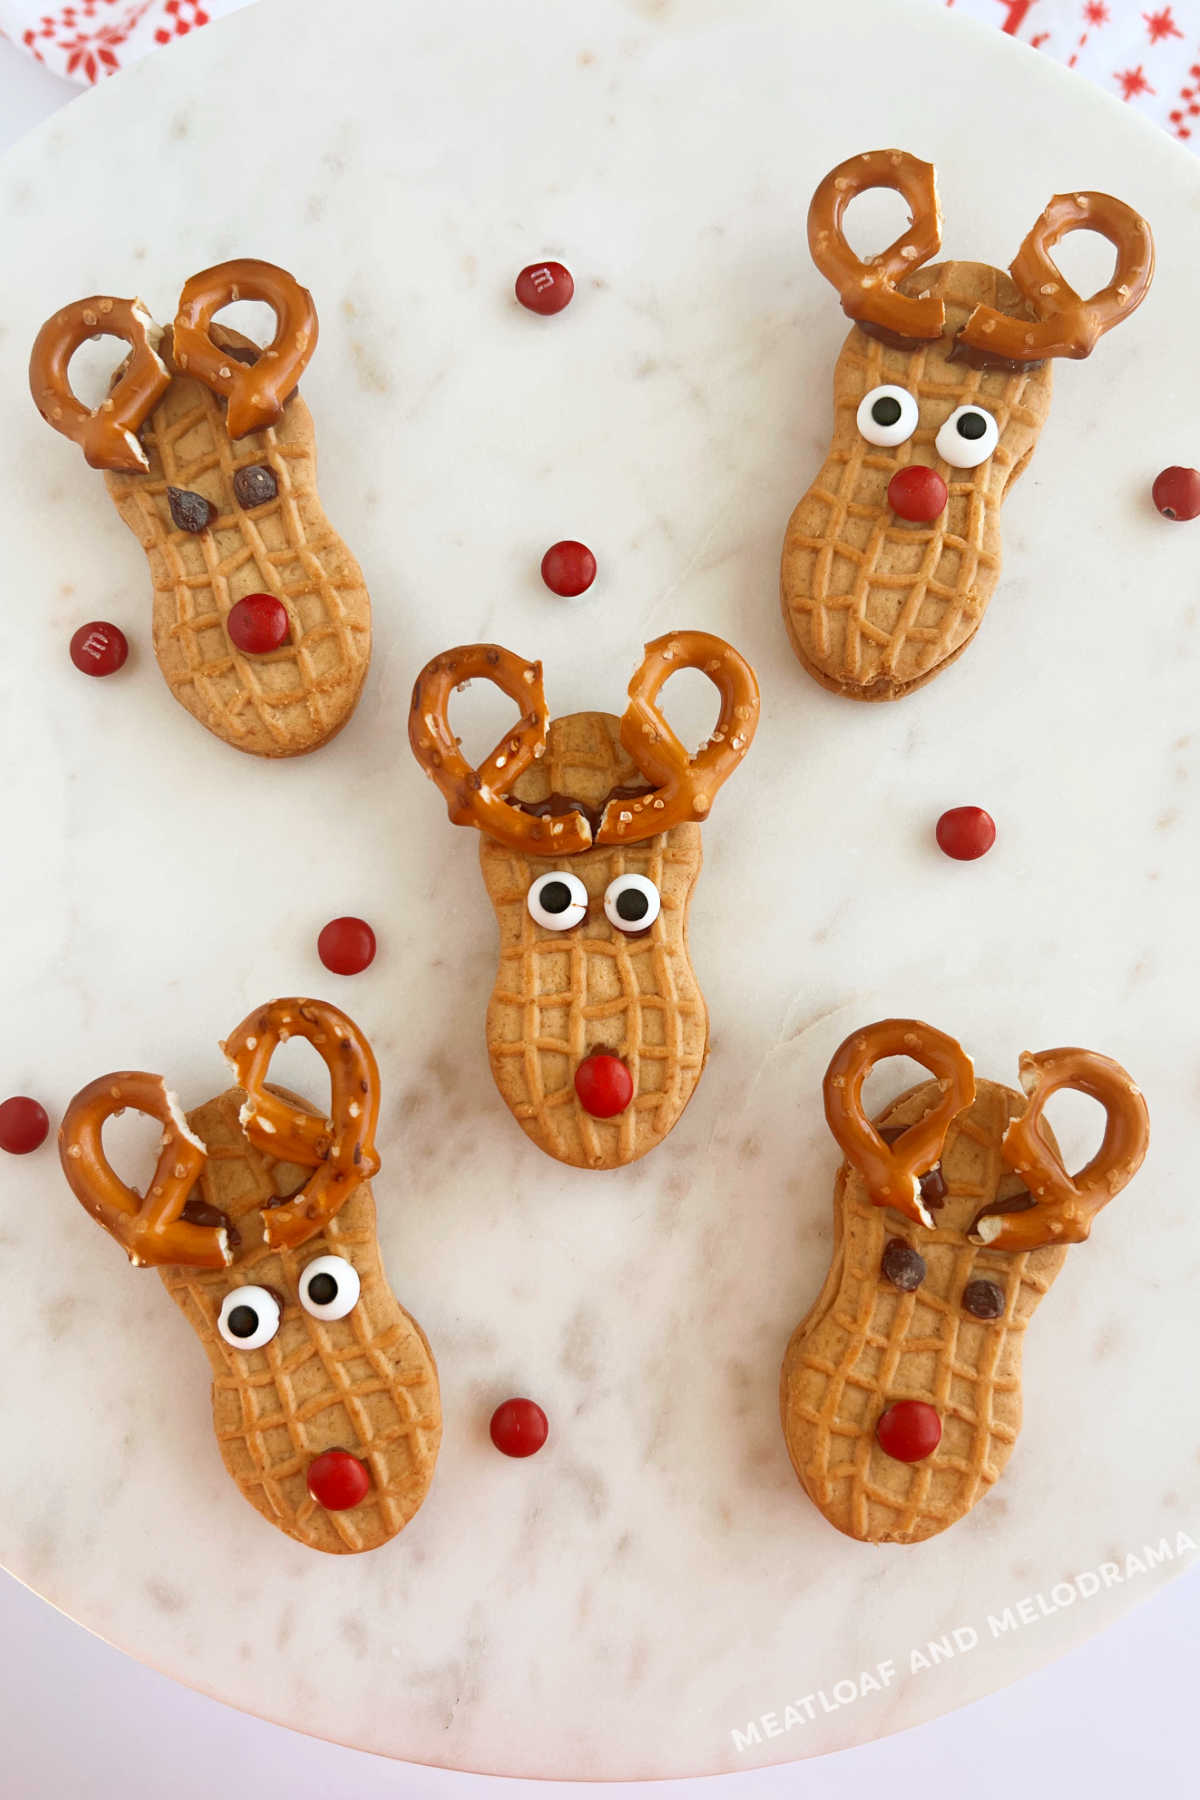 nutter butter reindeer cookies with pretzel antlers and red candy noses on platter